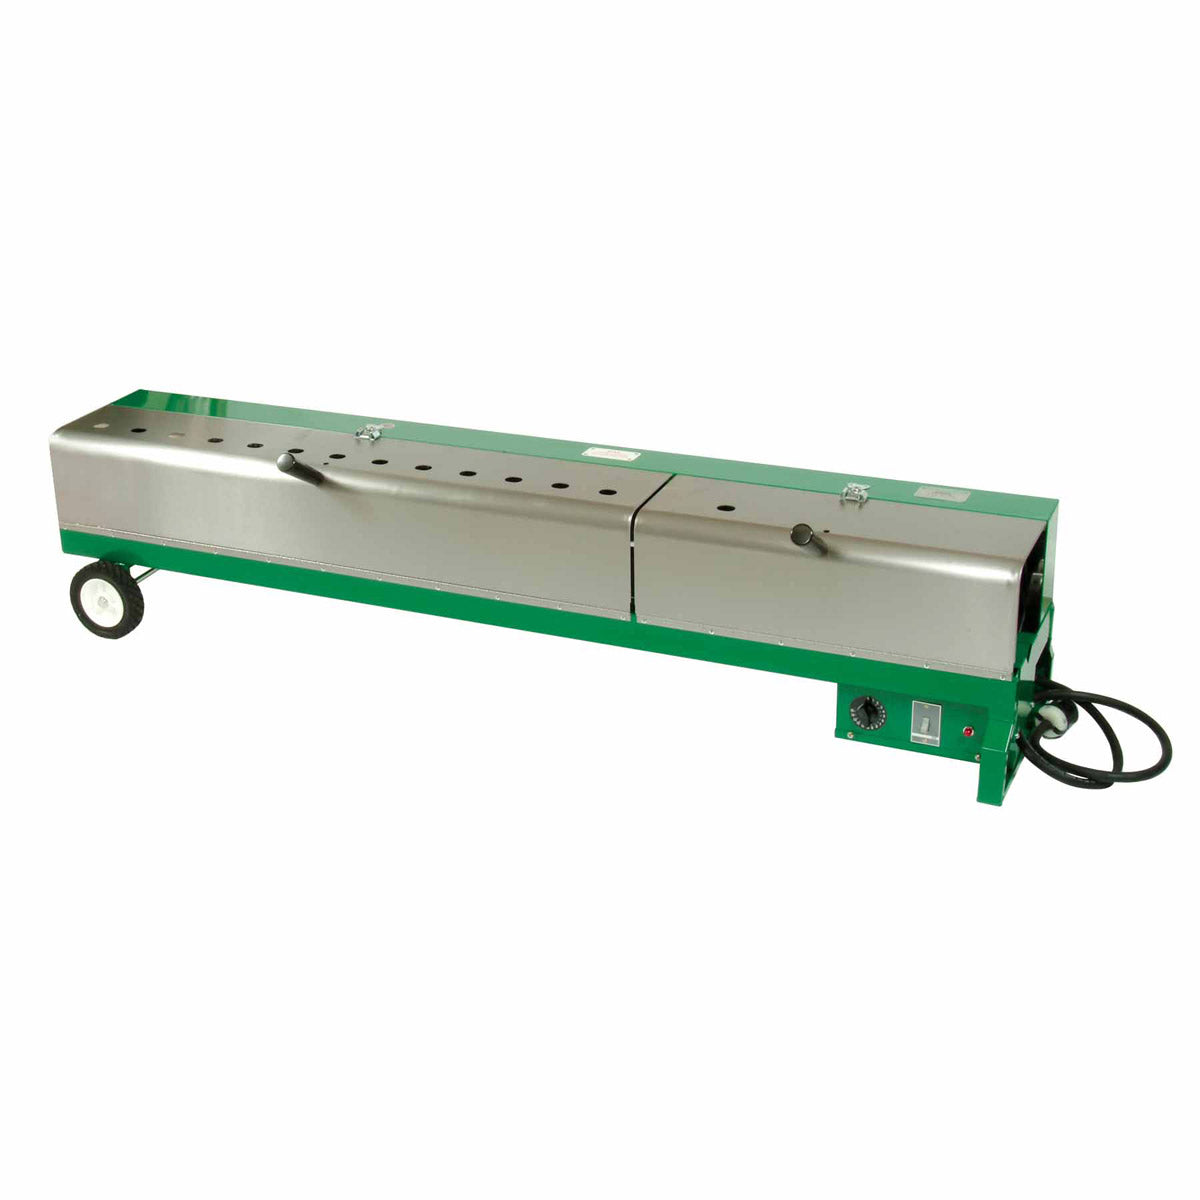 Greenlee 847 1/2"-6" Electric PVC Heater/Bender (Non-Motorized)